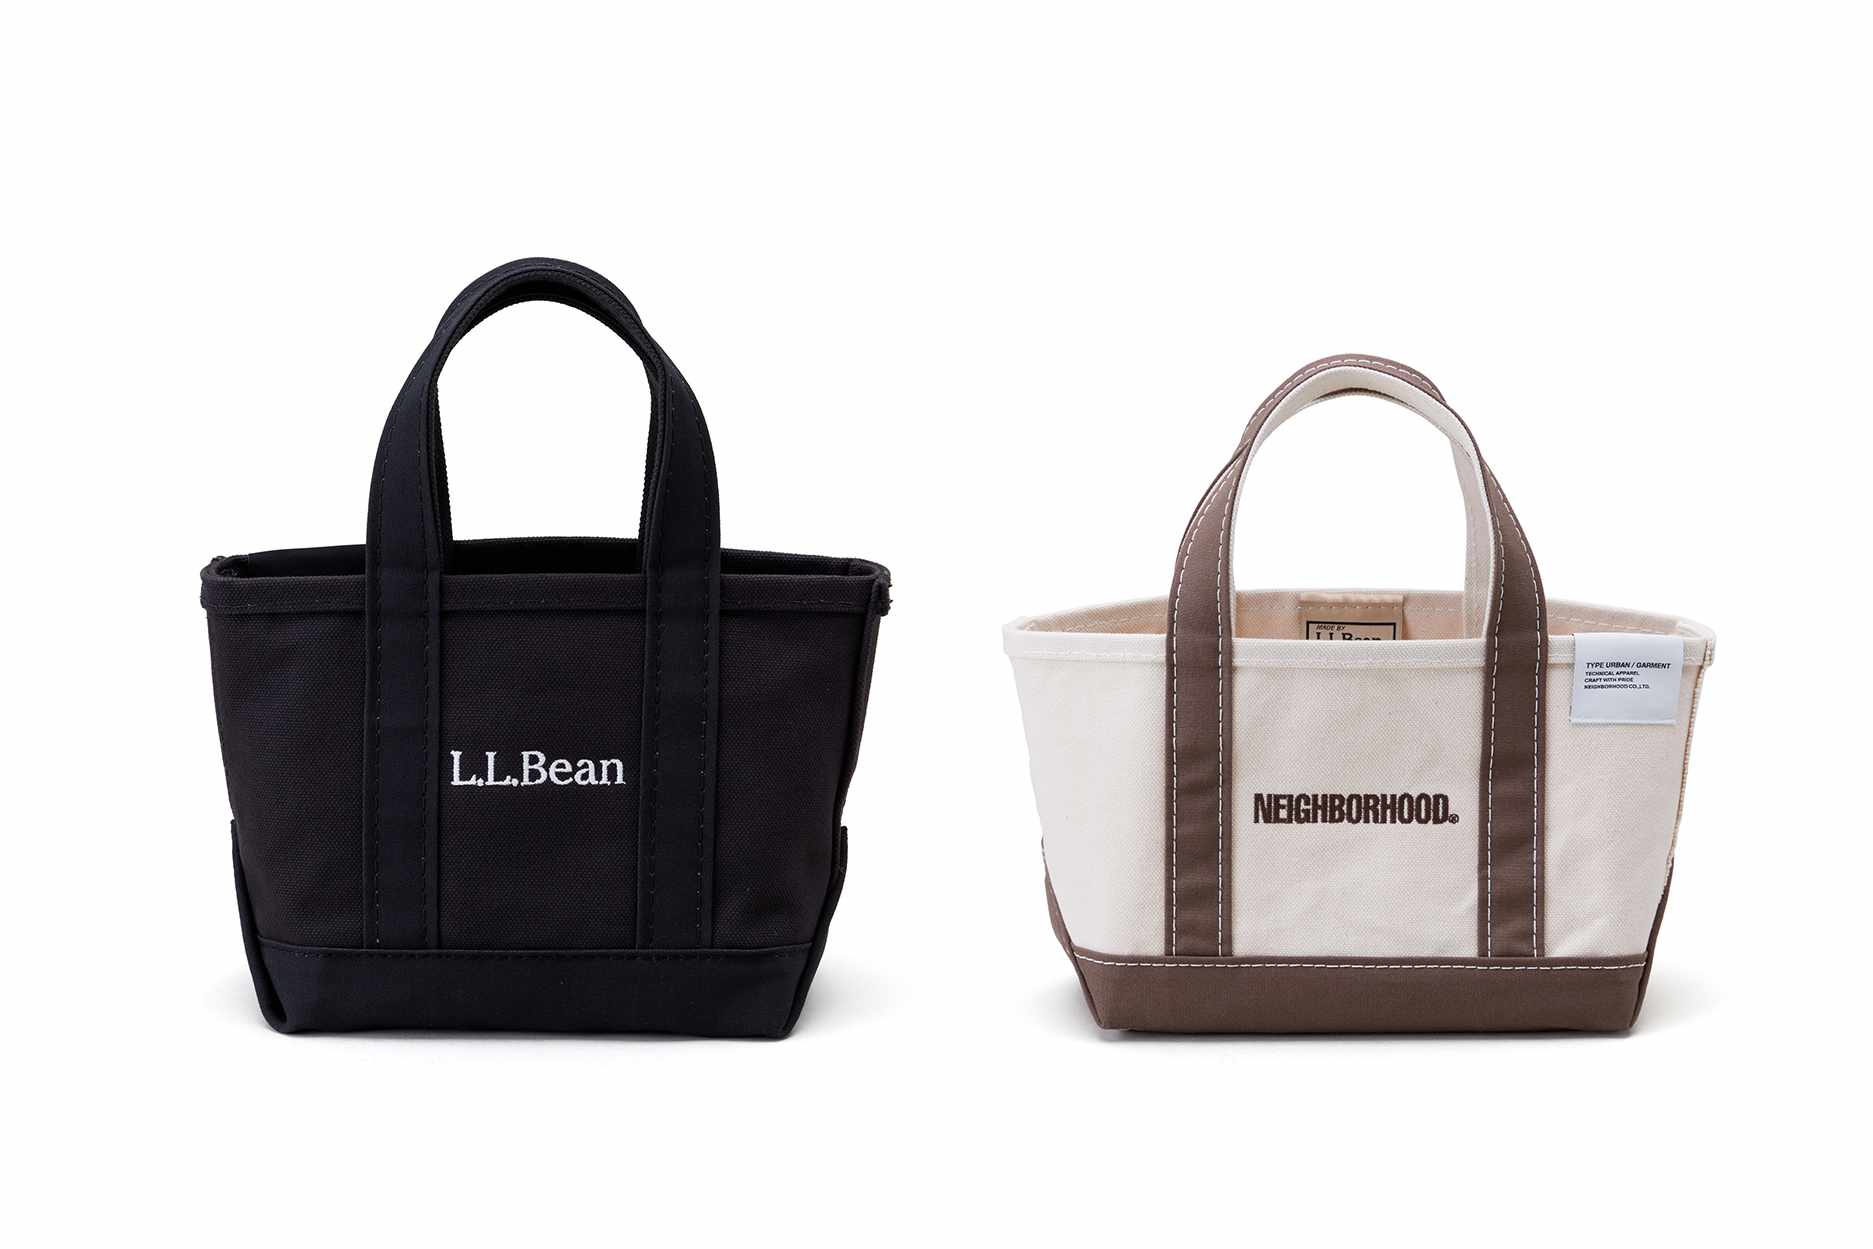 LL Bean's Killer Collabs Continue With NEIGHBORHOOD Bags & Caps